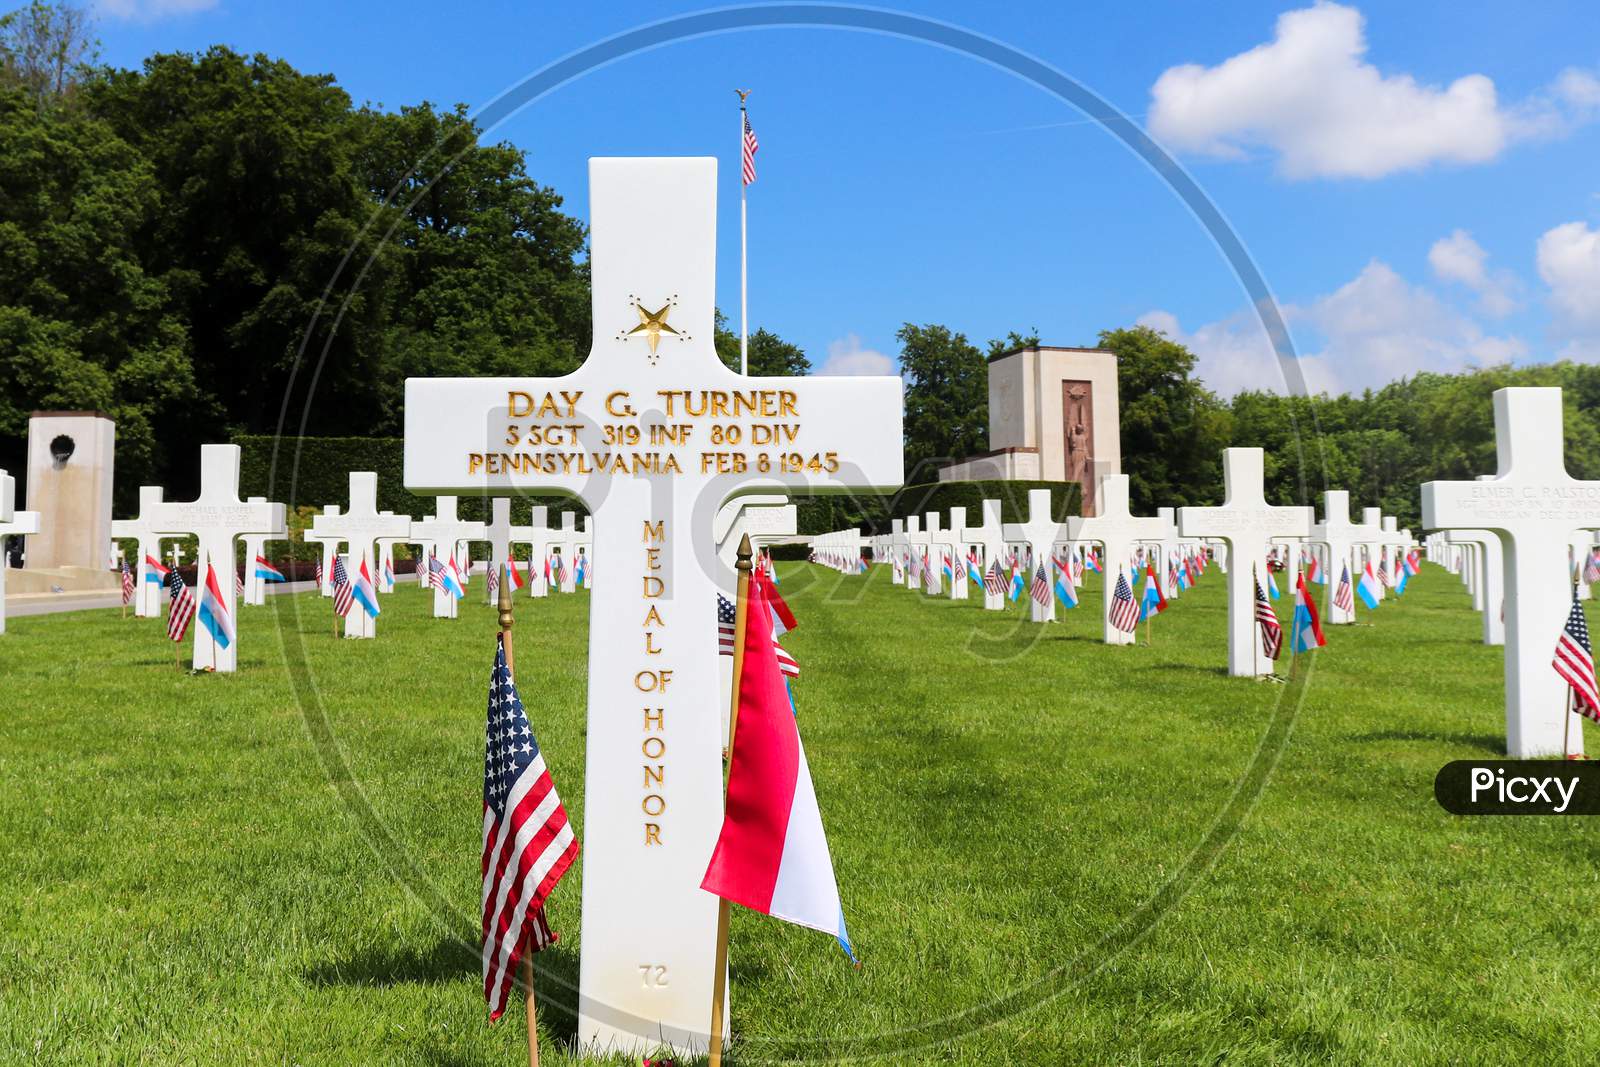 Medal Of Honor Recipient Buried At A Military Cemetery